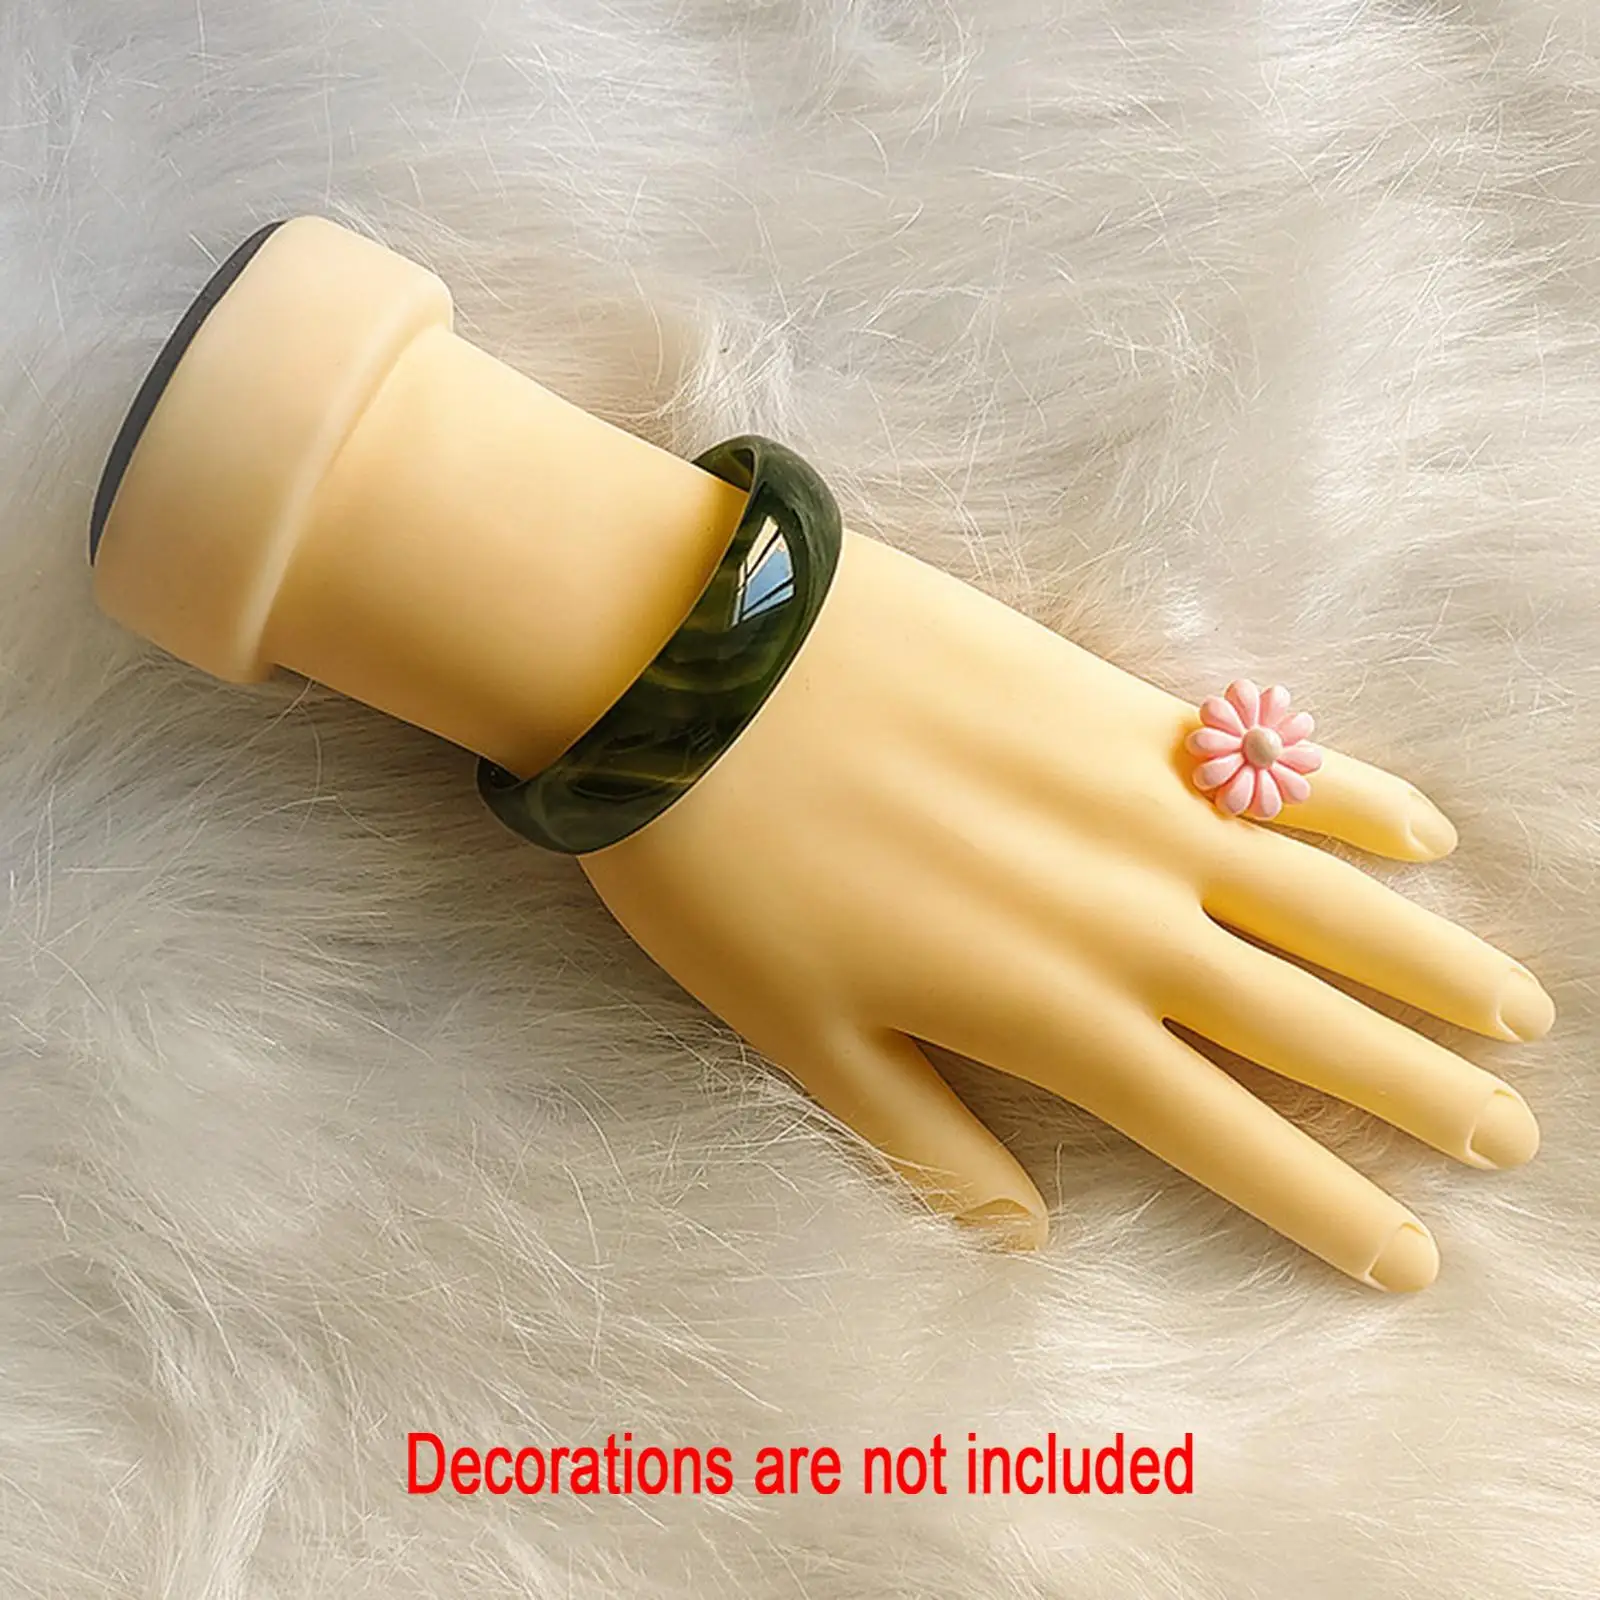 Nail Practice Hand Bendable Movable Stand Mannequin Fake Model for Beginners